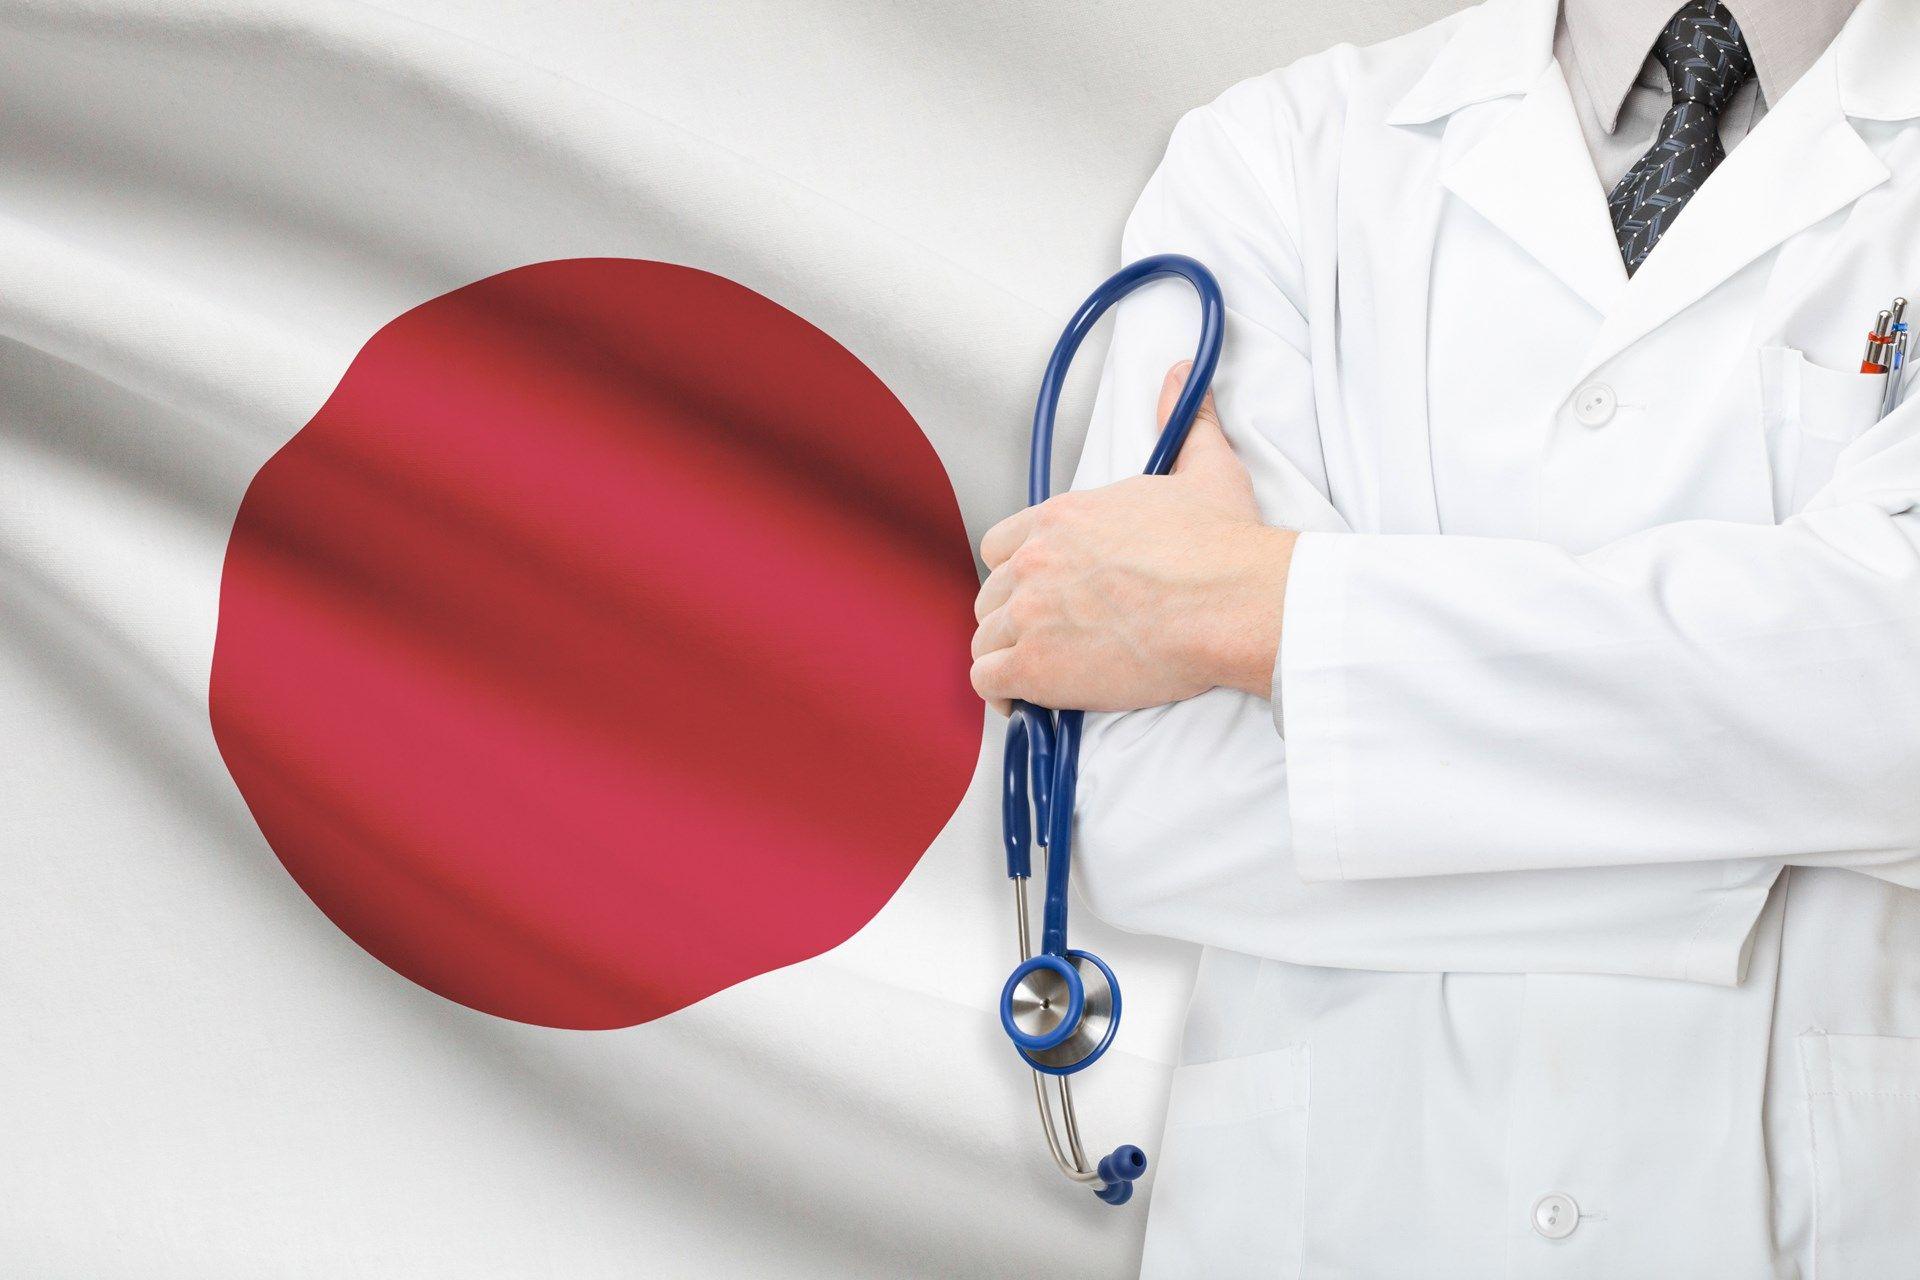 Japan Health Care Logo - The FDA Is Lethally Backward, Especially Compared to Japan ...